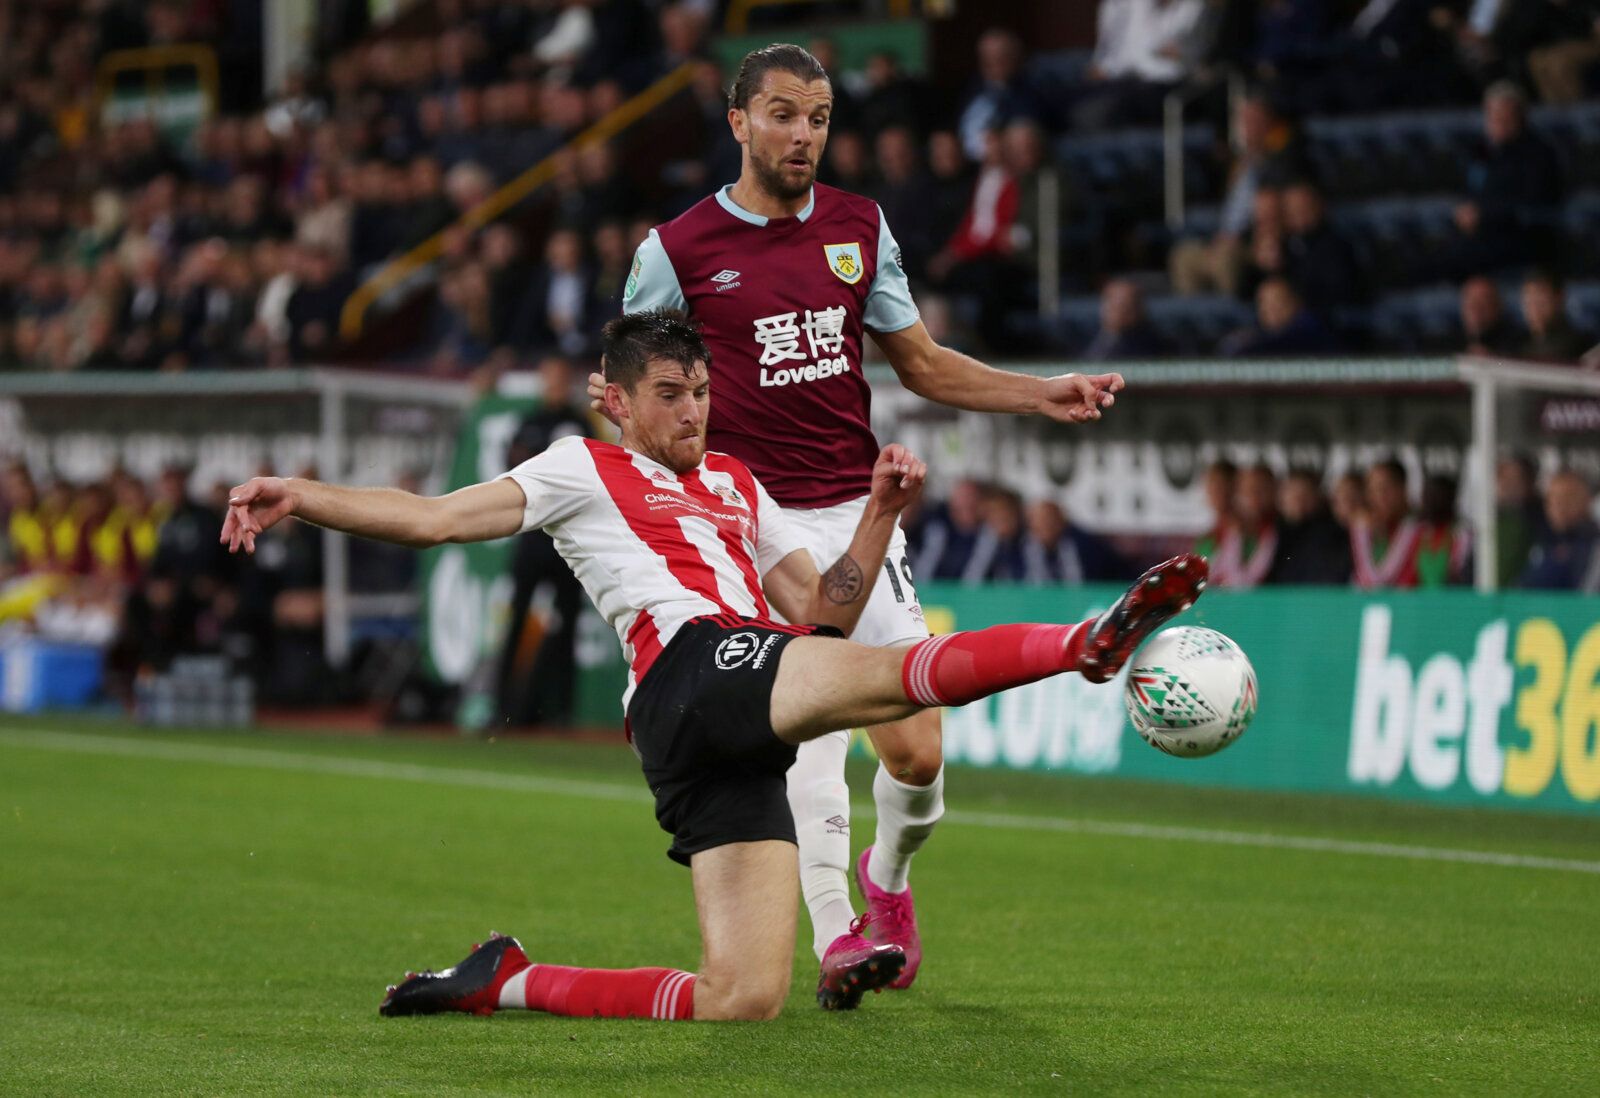 Soccer Football - Carabao Cup Second Round - Burnley v Sunderland - Turf Moor, Burnley, Britain - August 28, 2019  Burnley's Jay Rodriguez in action with Sunderland's Jack Baldwin   Action Images via Reuters/Lee Smith  EDITORIAL USE ONLY. No use with unauthorized audio, video, data, fixture lists, club/league logos or 